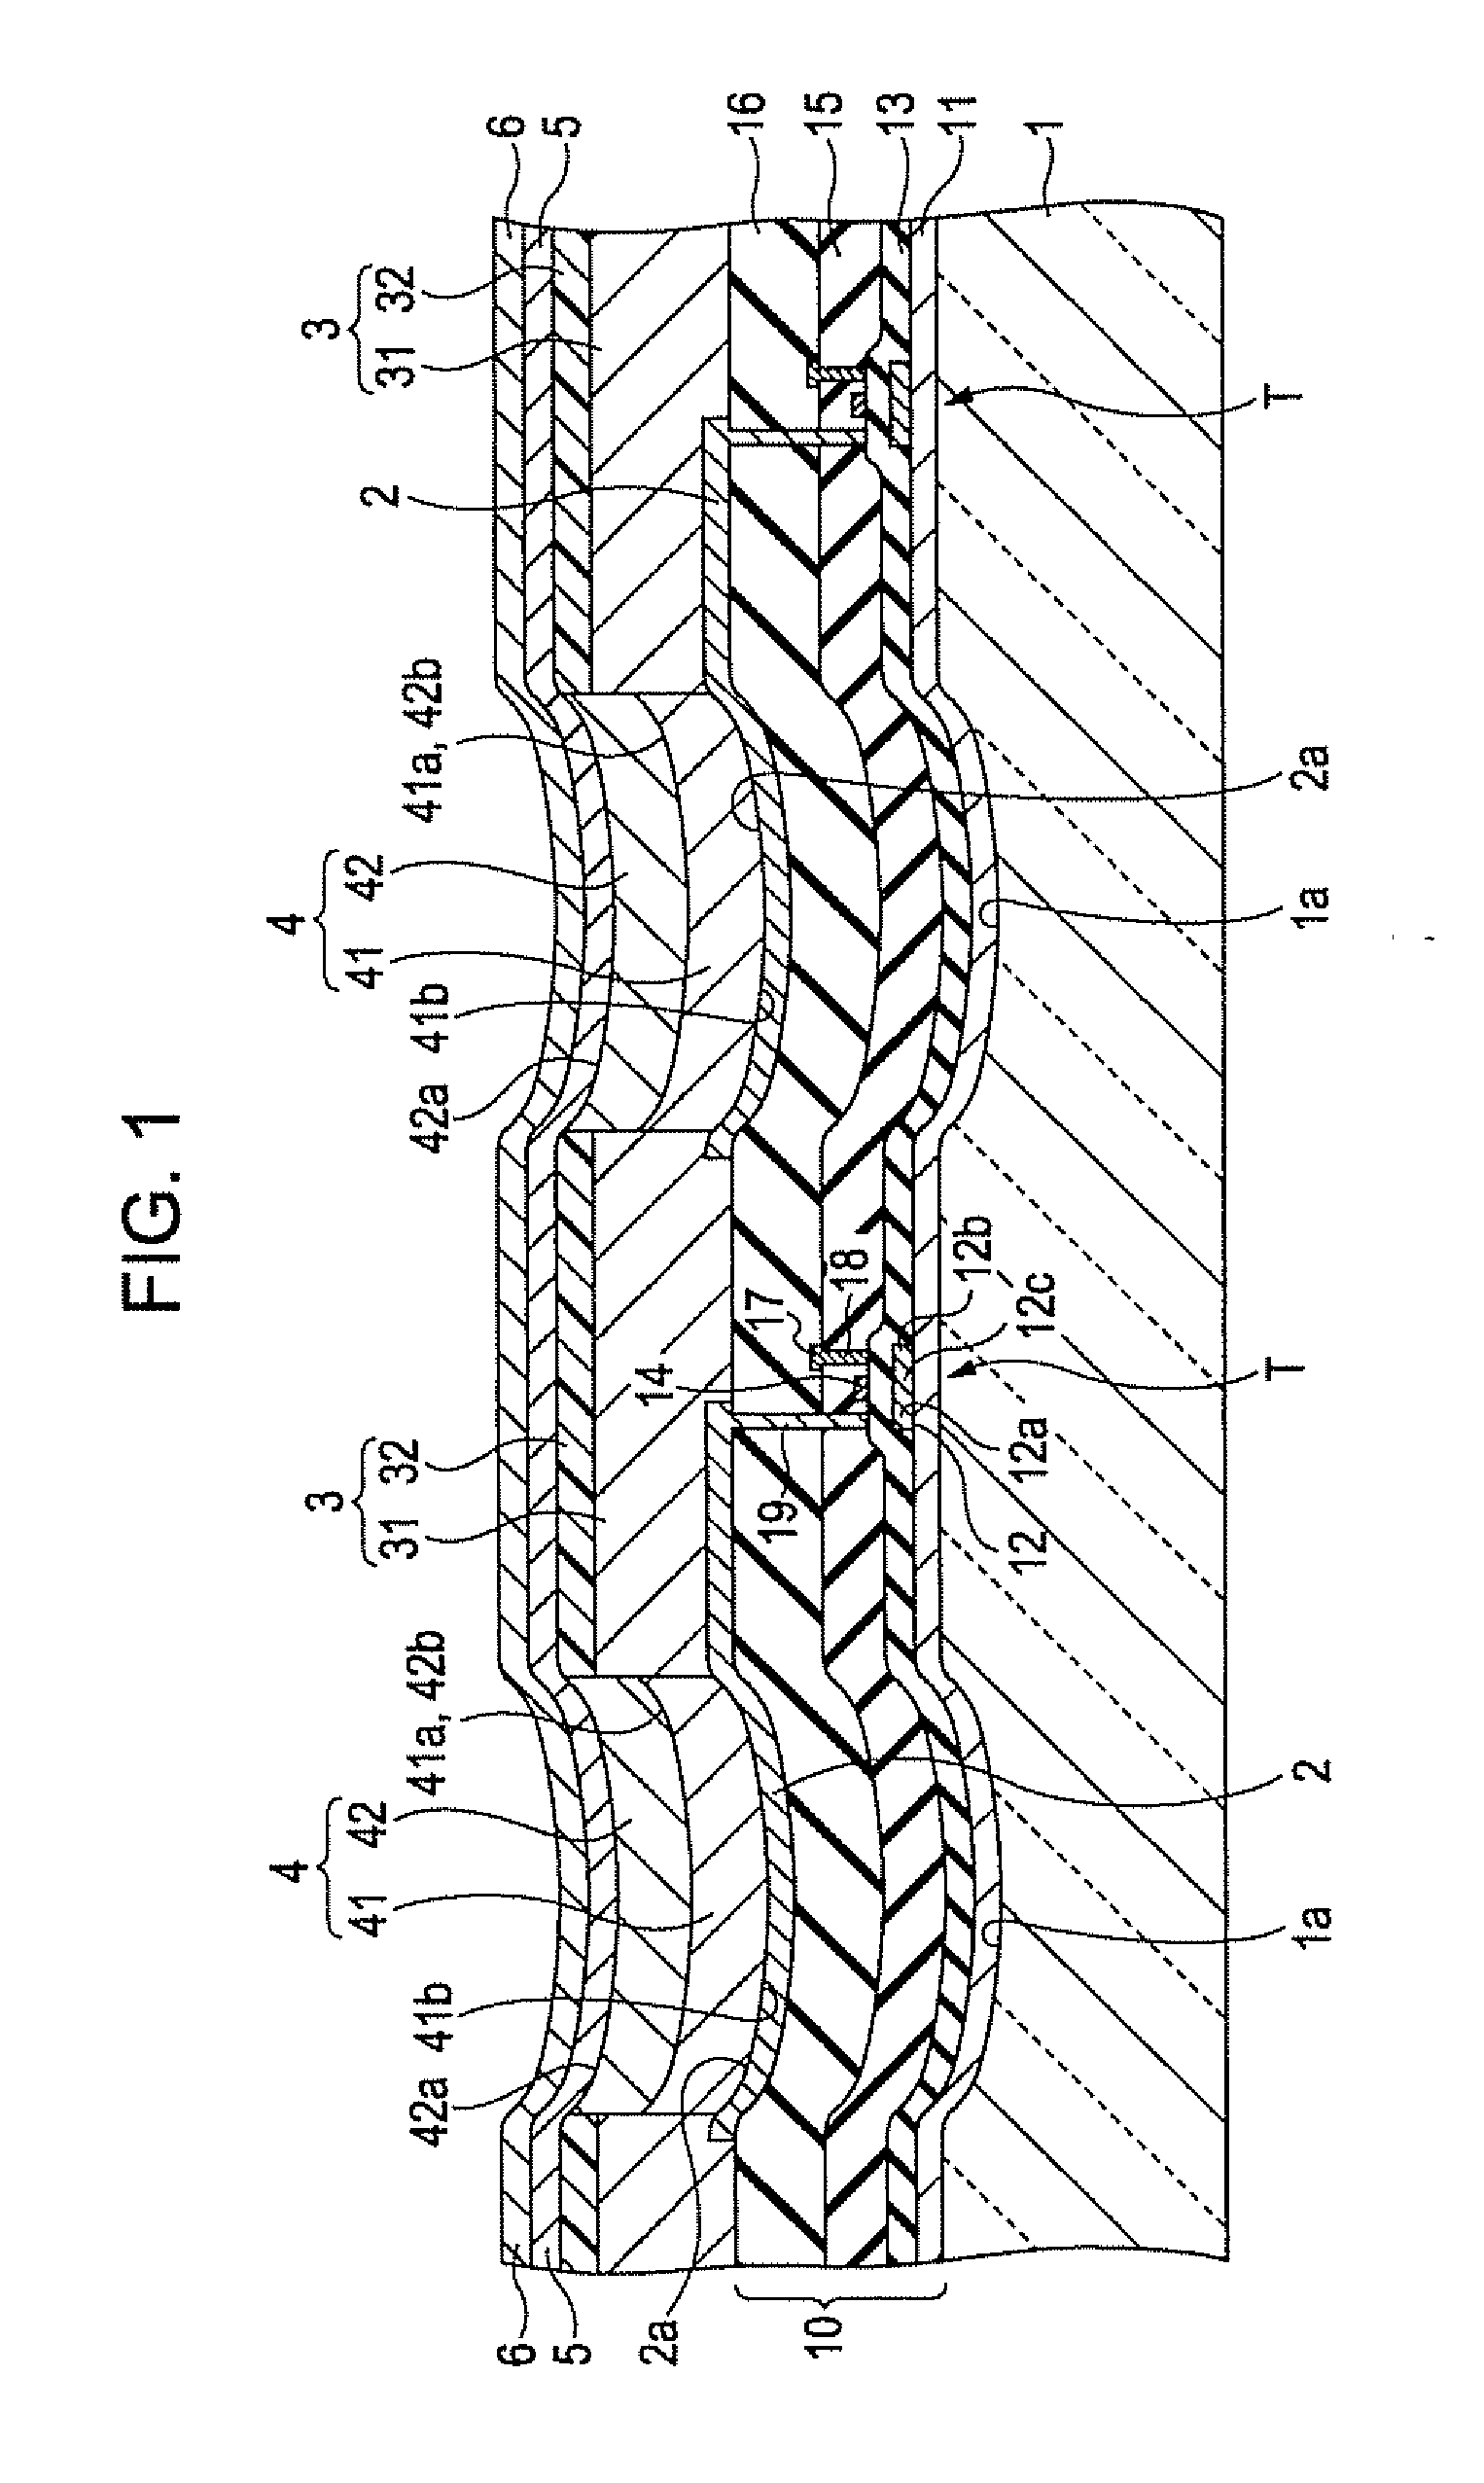 Electroluminescent device, method of manufacturing the device, electronic device, thin-film structure, and method of forming thin film